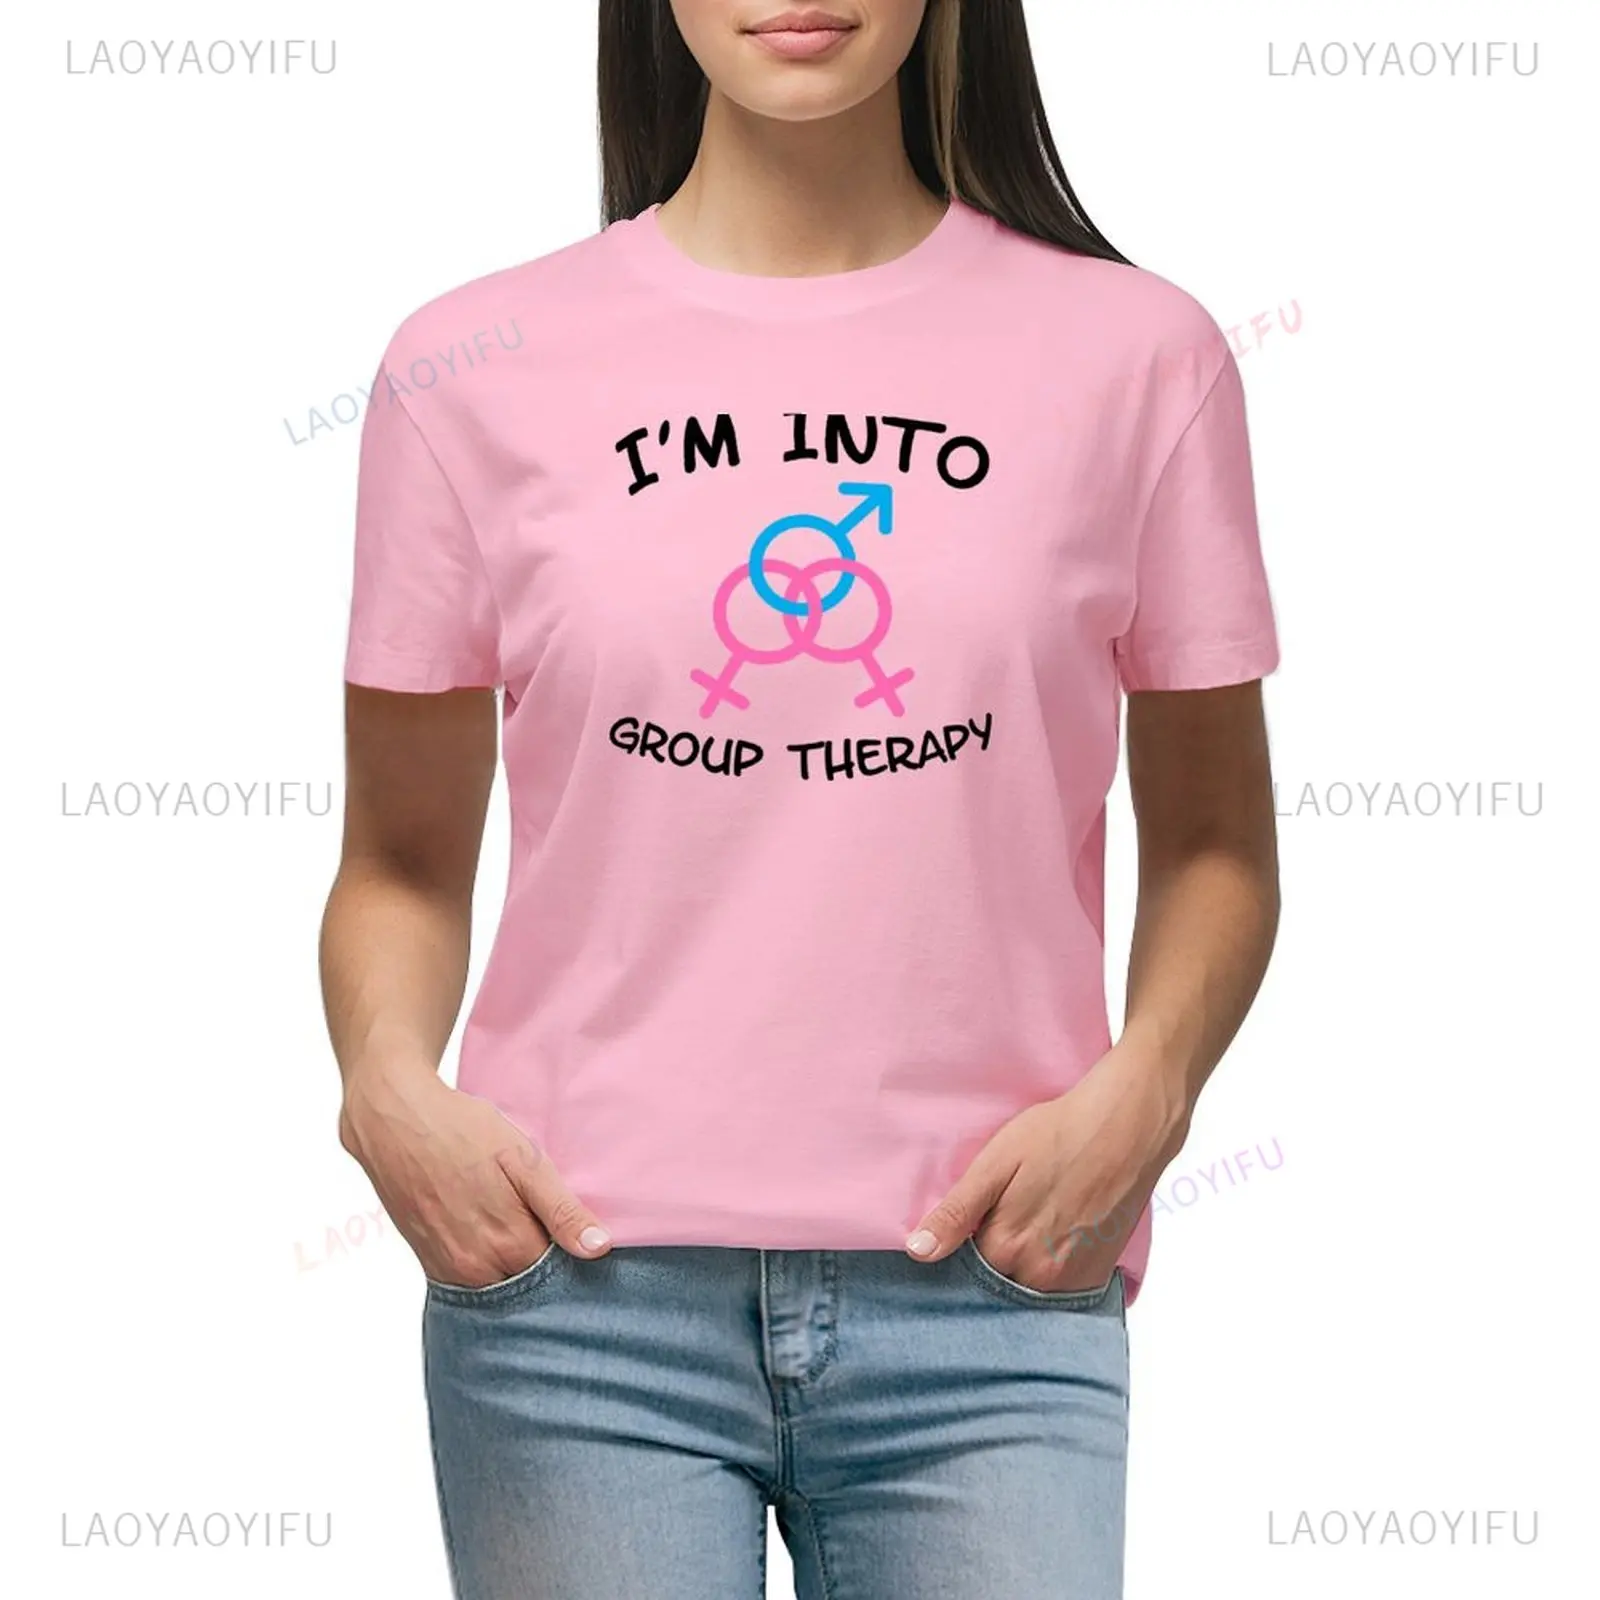 

I'm in To Group Therapy FMF Threesome Classic Lifestyle T-shirt Cotton Shirts Graphic Tees Tees Western T Shirts for Women